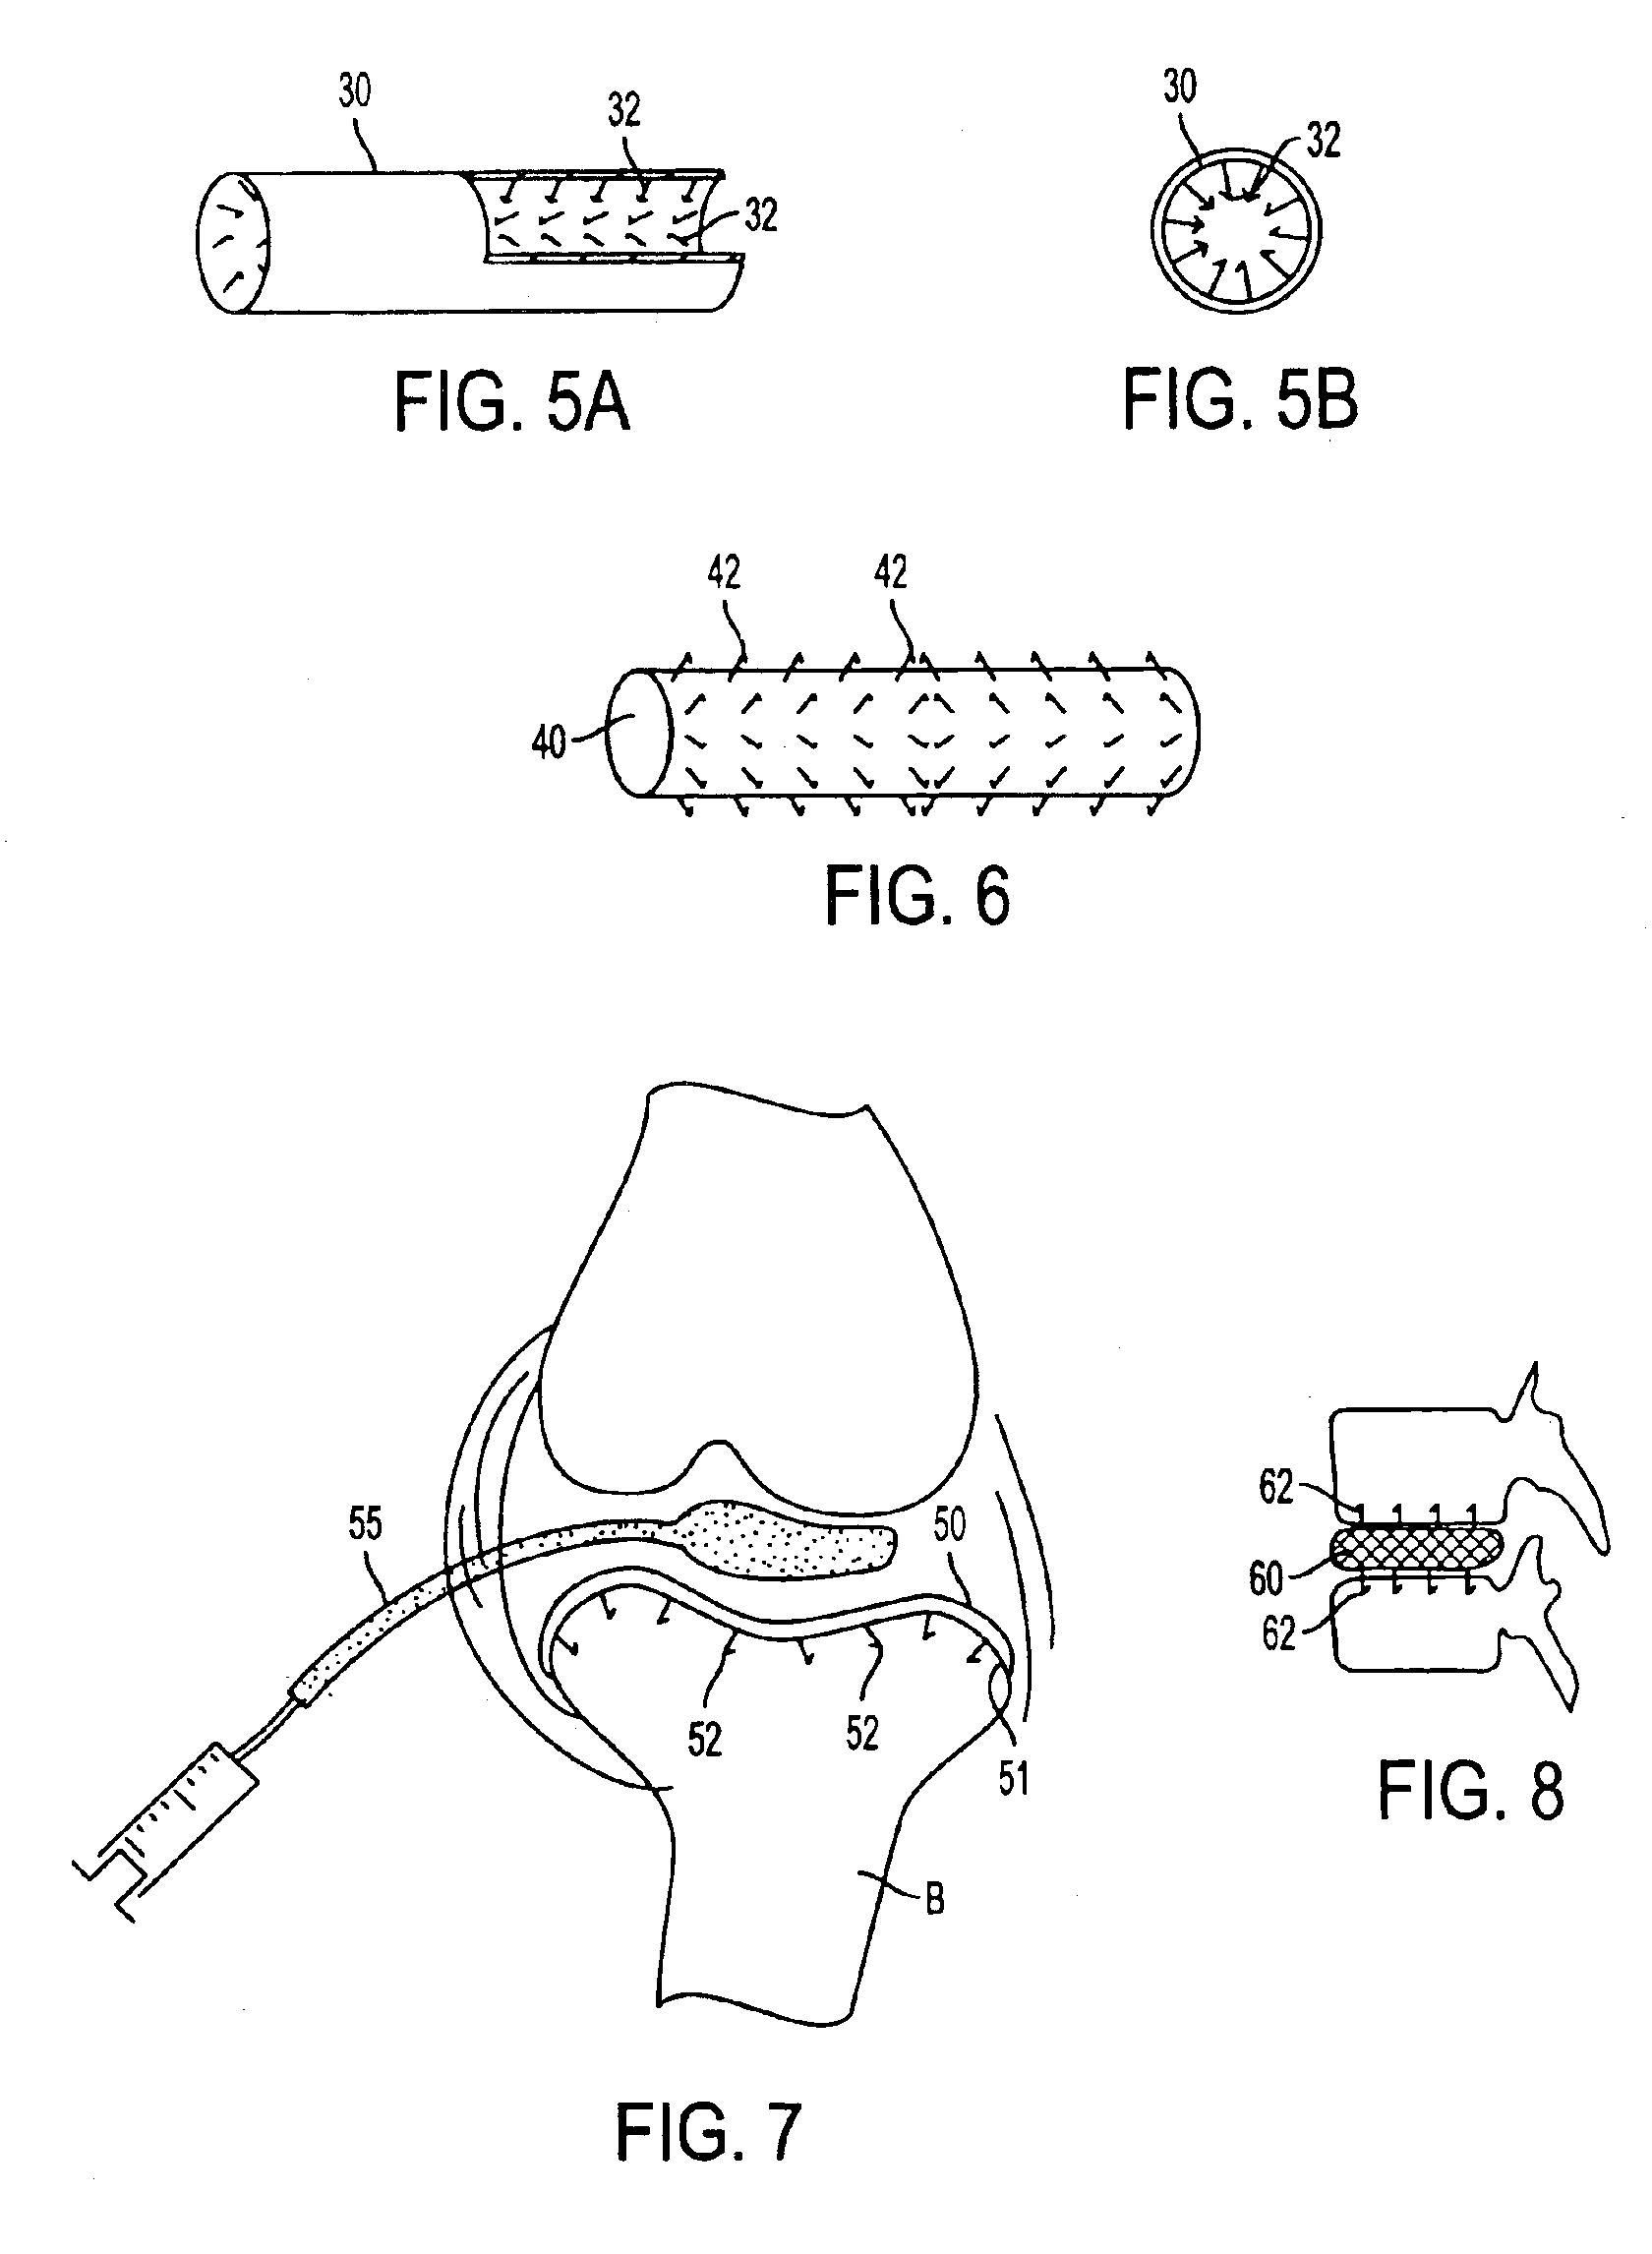 Multi-barbed device for retaining tissue in apposition and methods of use